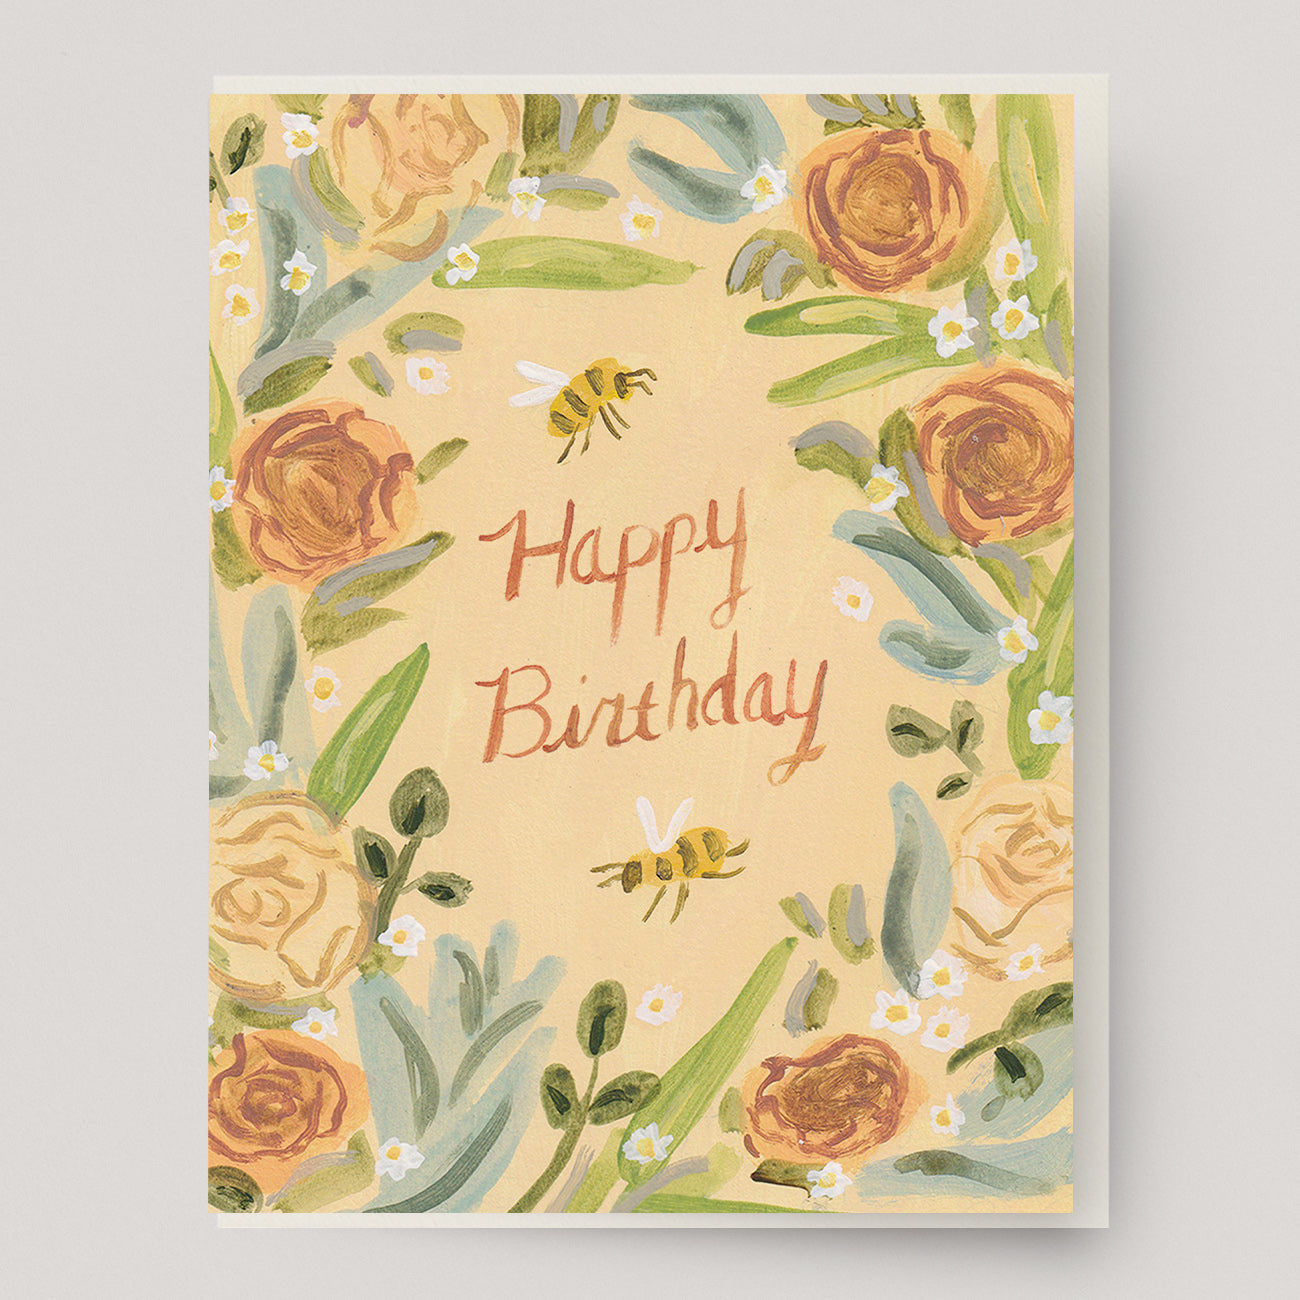 A peach colored greeting card with a wreath of roses, honey bees, daisies and the text "happy birthday" in the center.  Hand illustrated by artist Katherine Lewis. Made by Ingrid Press card and gift company, ethically printed in the USA.